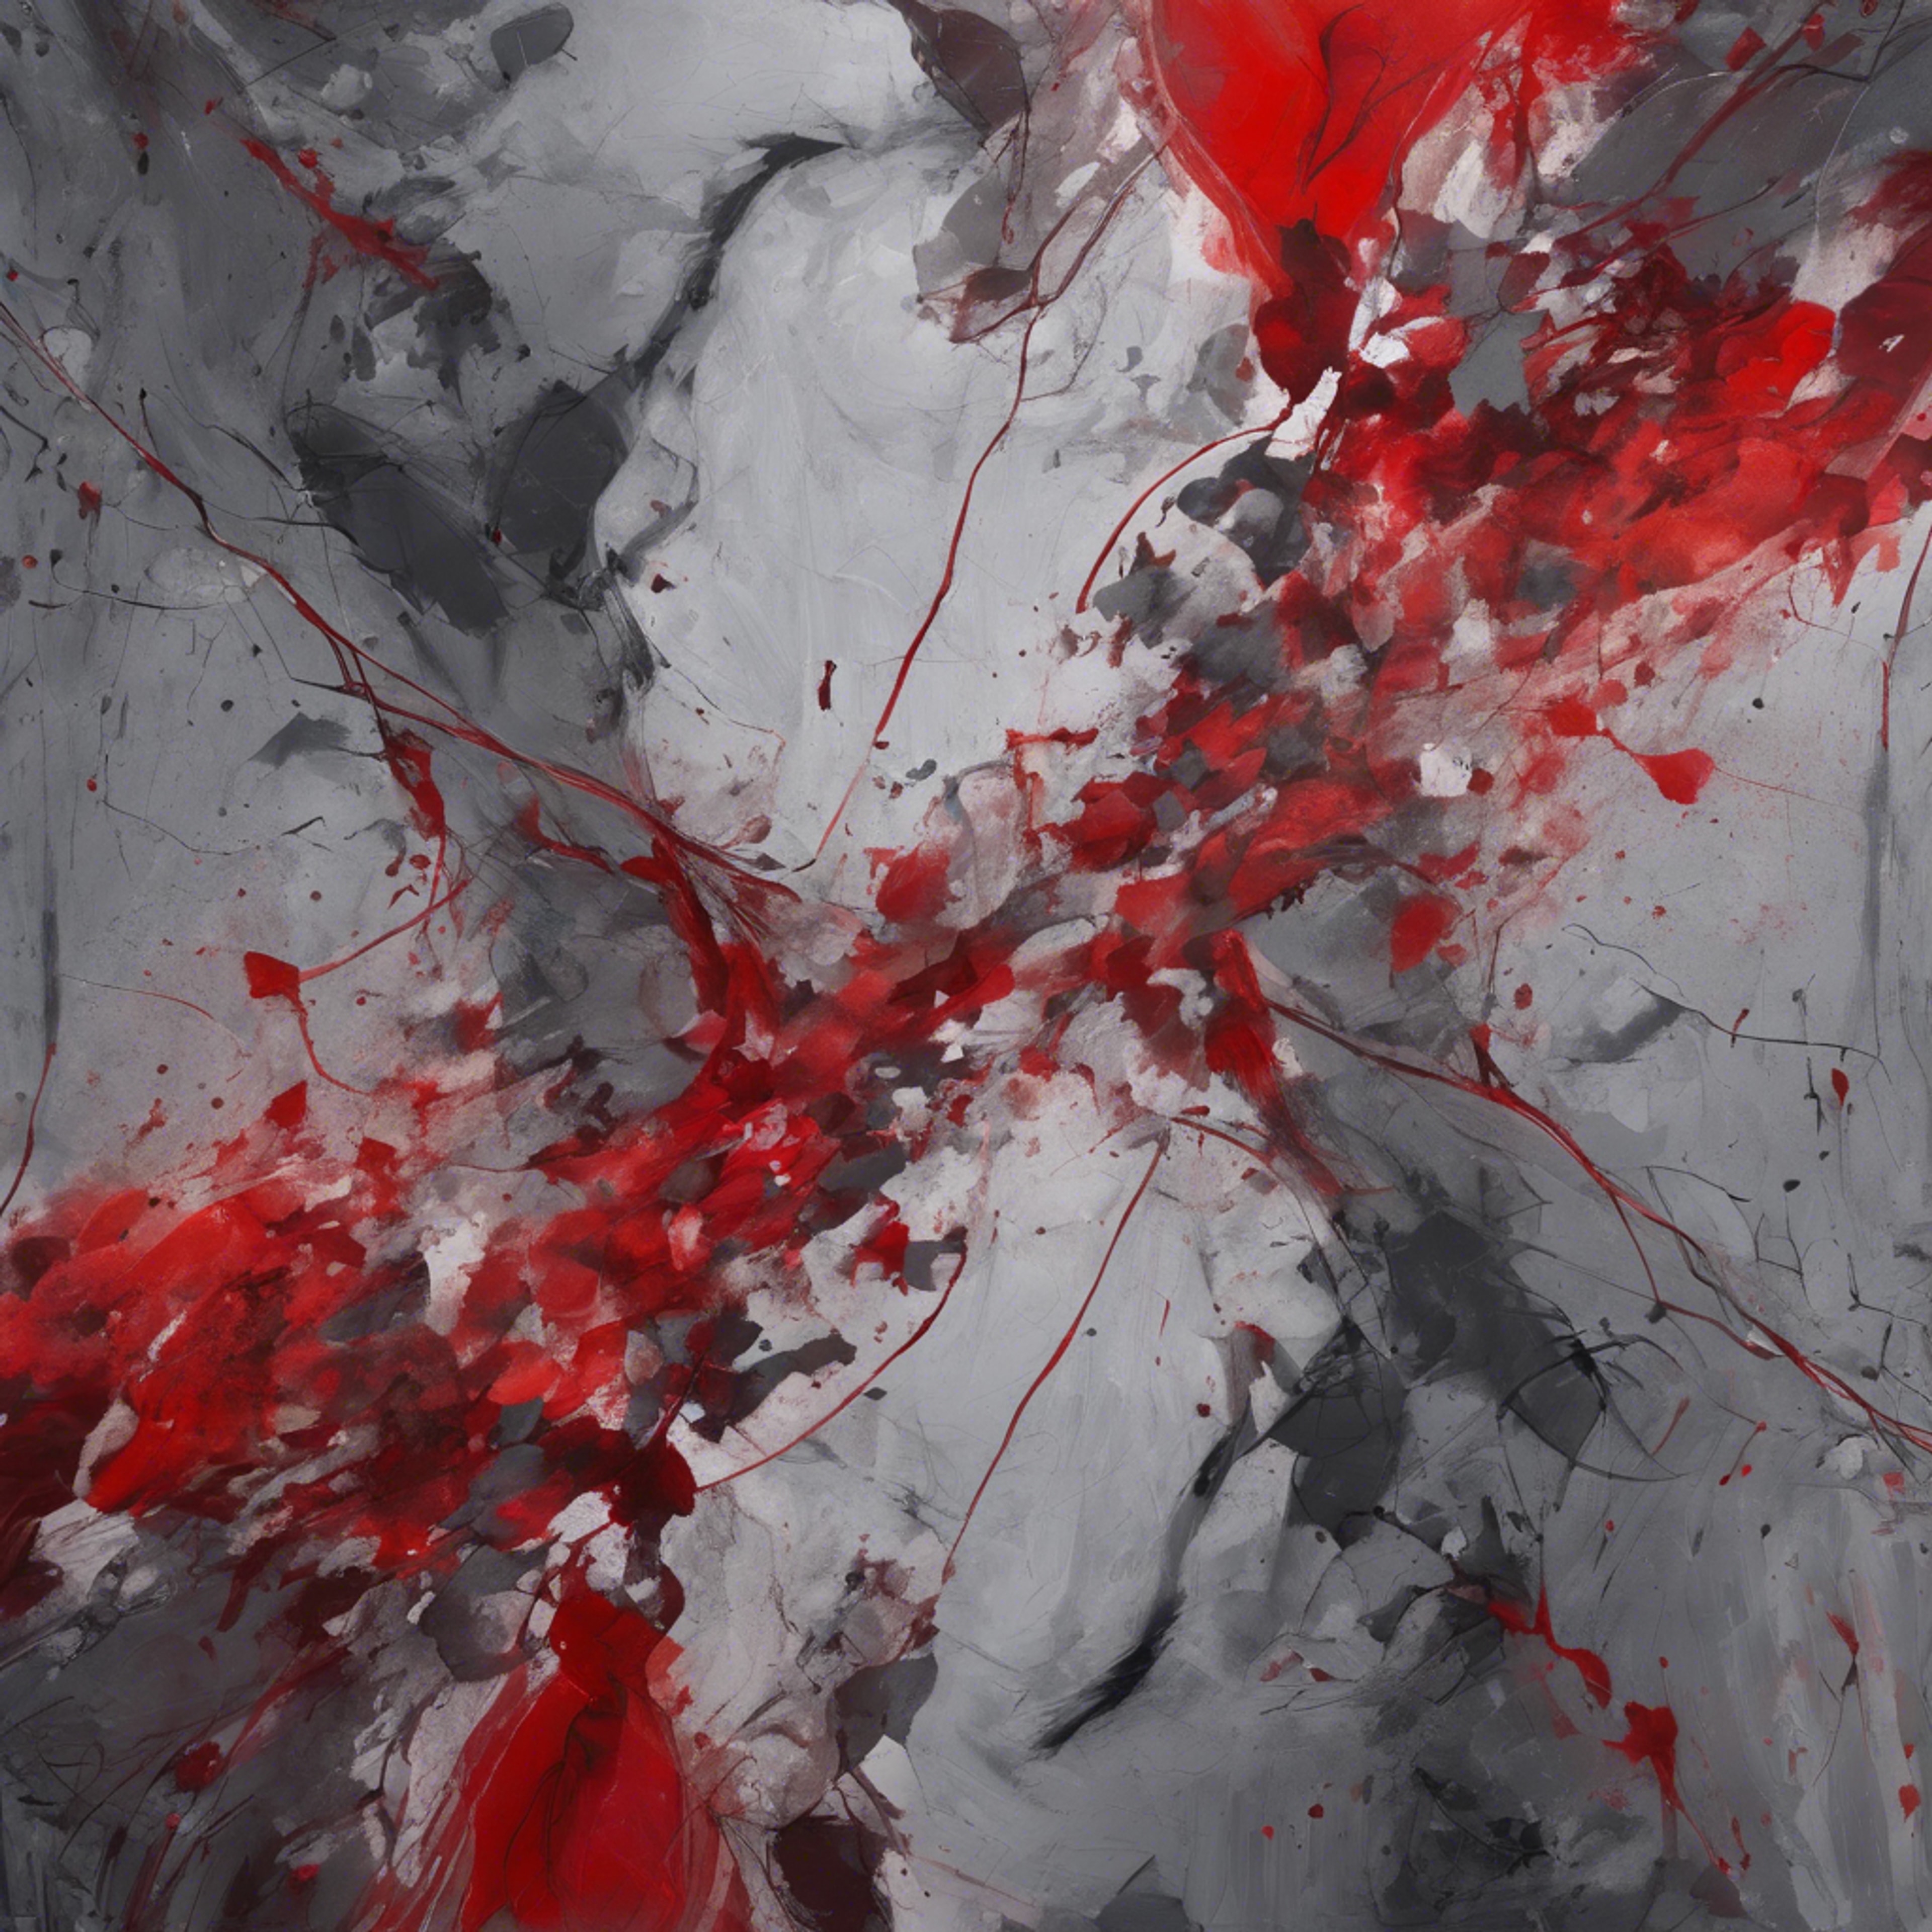 A red and gray abstract painting demonstrating the battle between passion and reason. ផ្ទាំង​រូបភាព[fb490a5db02d428289d0]